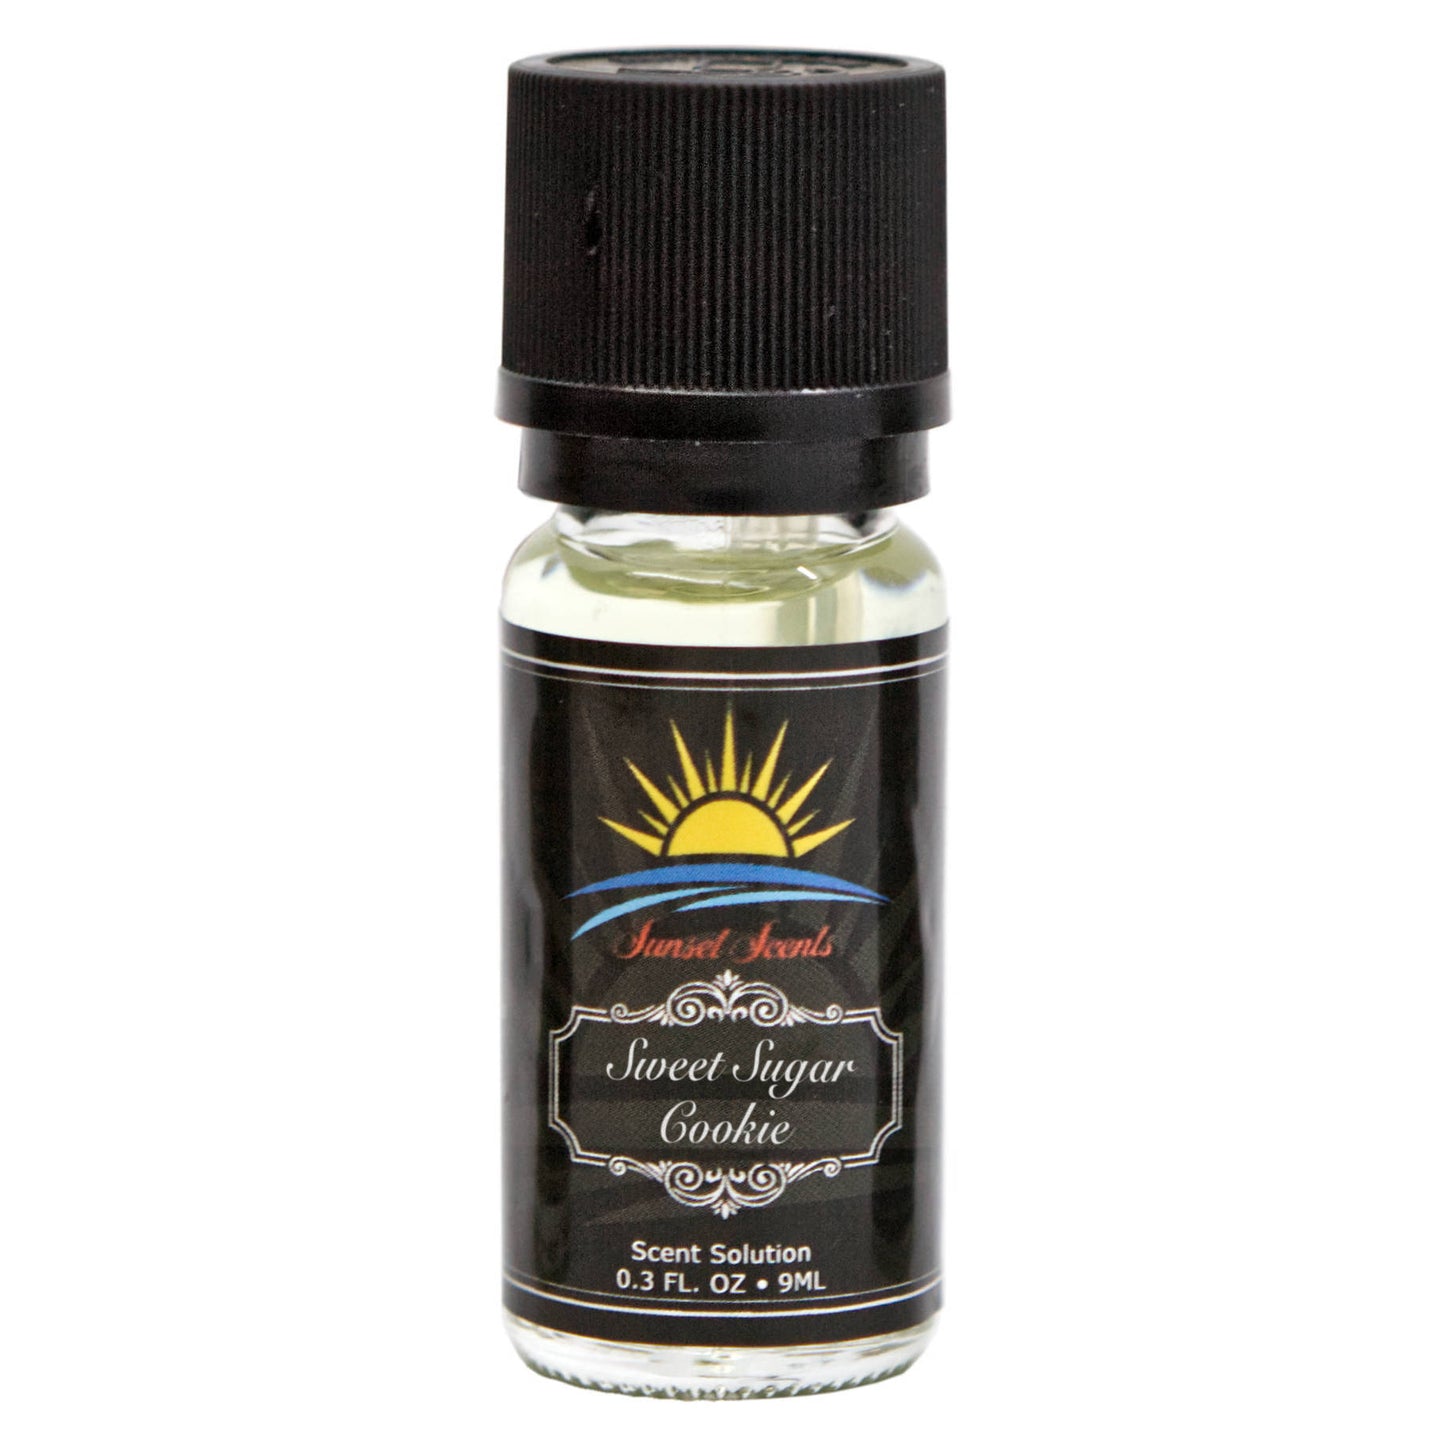 Sweet Sugar Cookie Scent Solution Oil